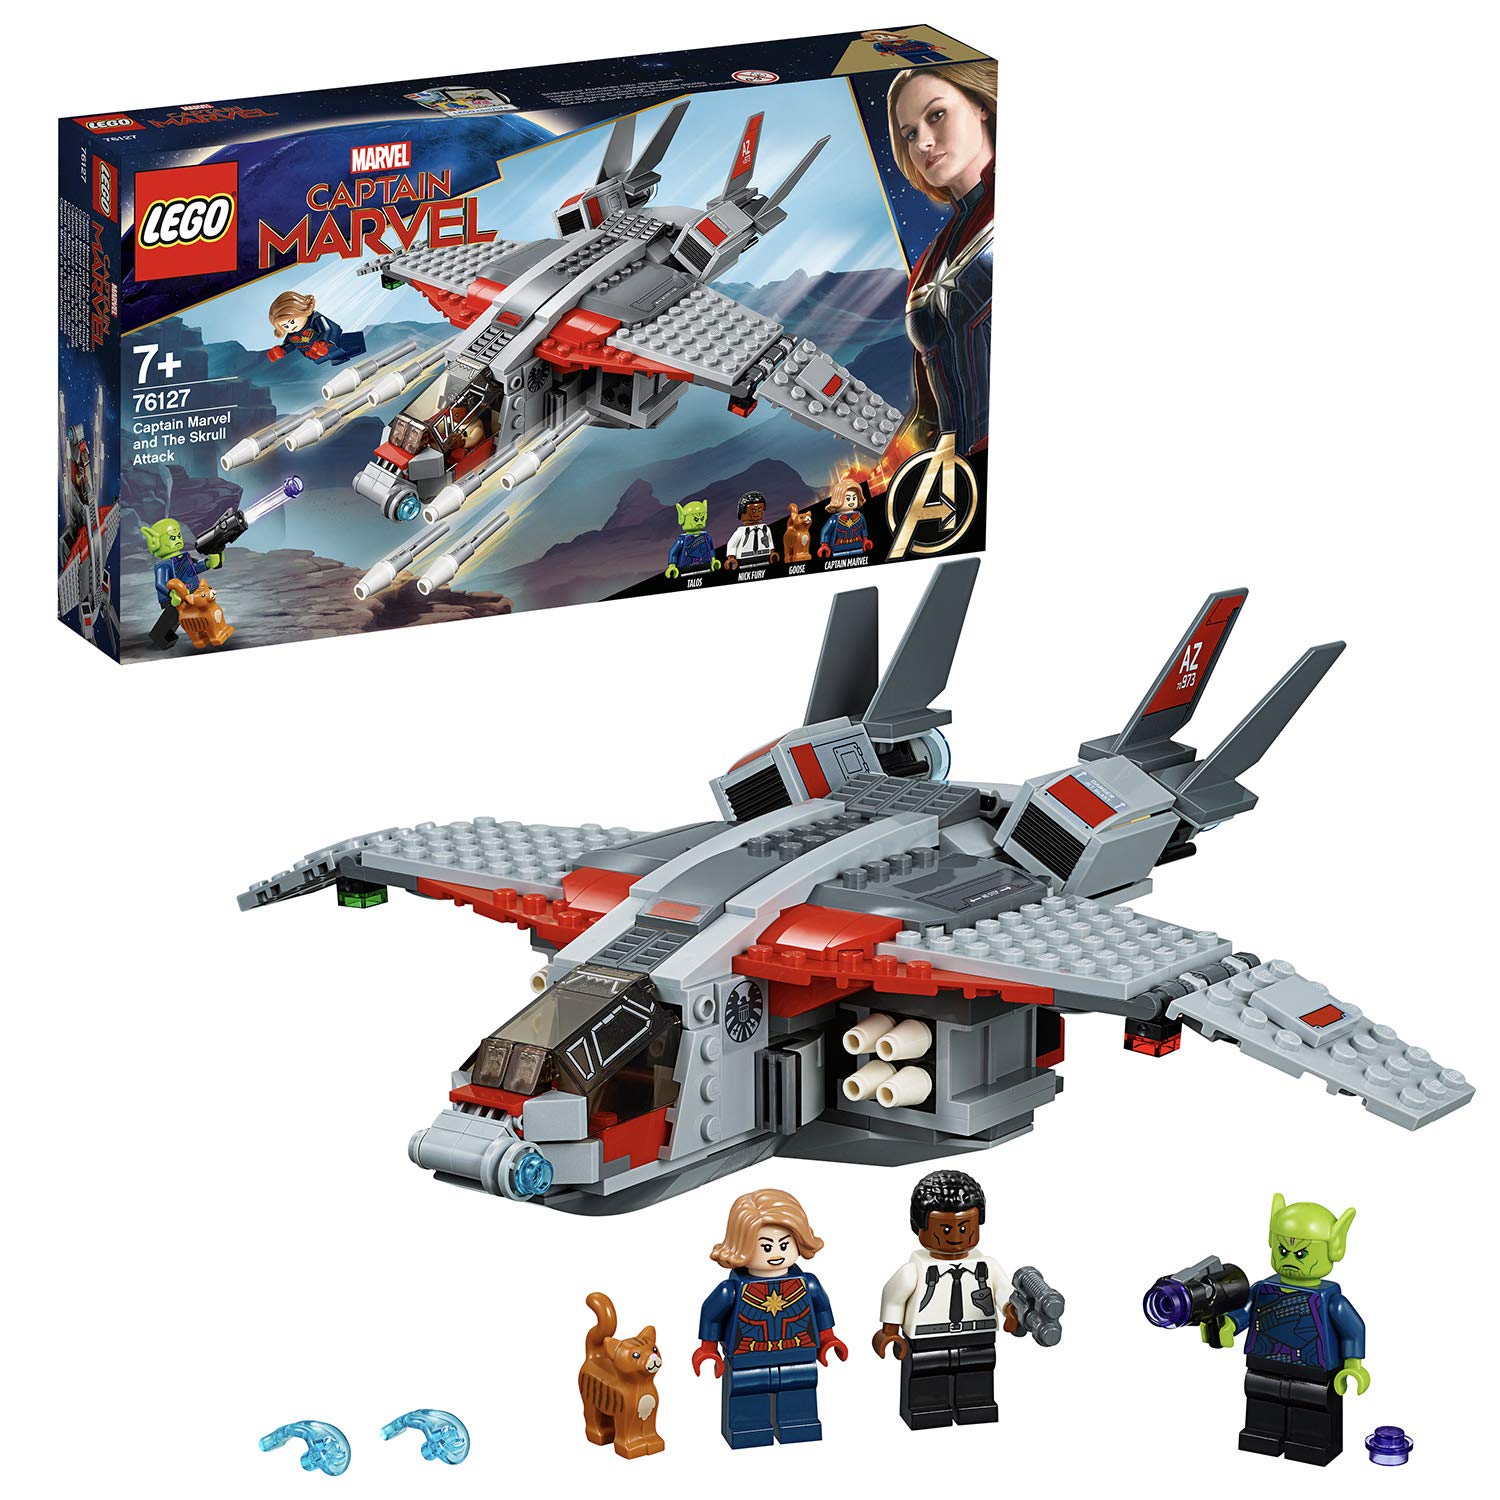 Lego® Marvel Super Heroes™ Captain Marvel And The Skrull Attack